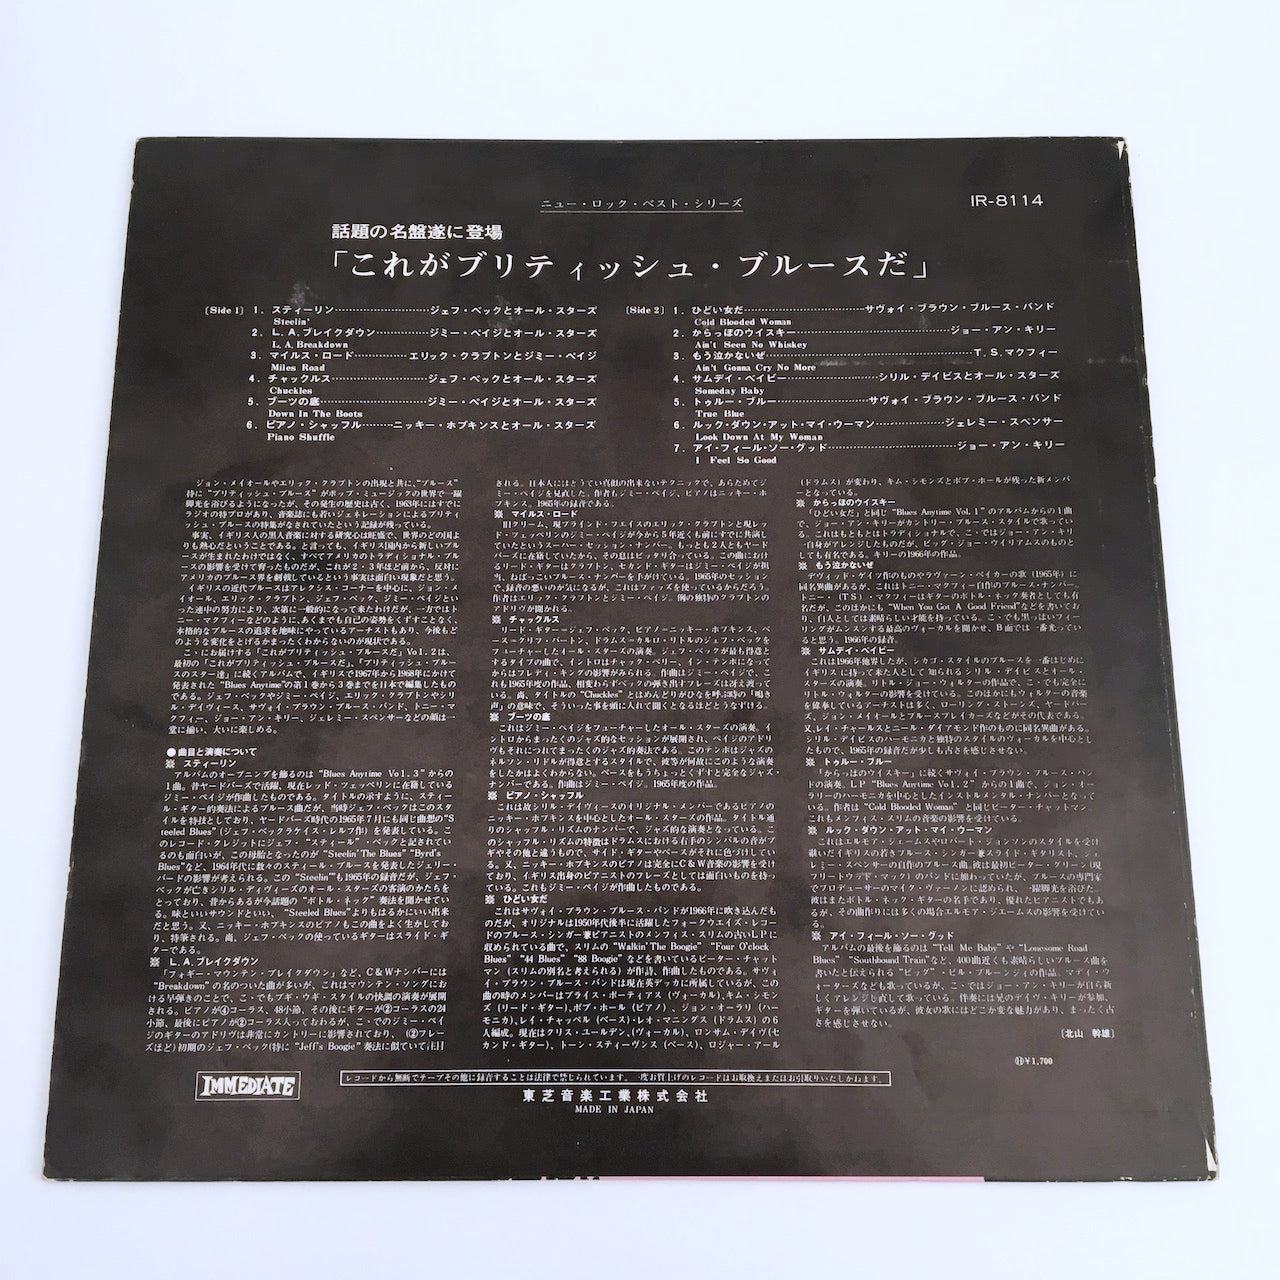 LP/ V.A. / BLUES ANYTIME VOL.2 - AN ANTHOLOGY OF BRITISH BLUES / 国内盤 ライナー付き IMMEDIATE IR-8114